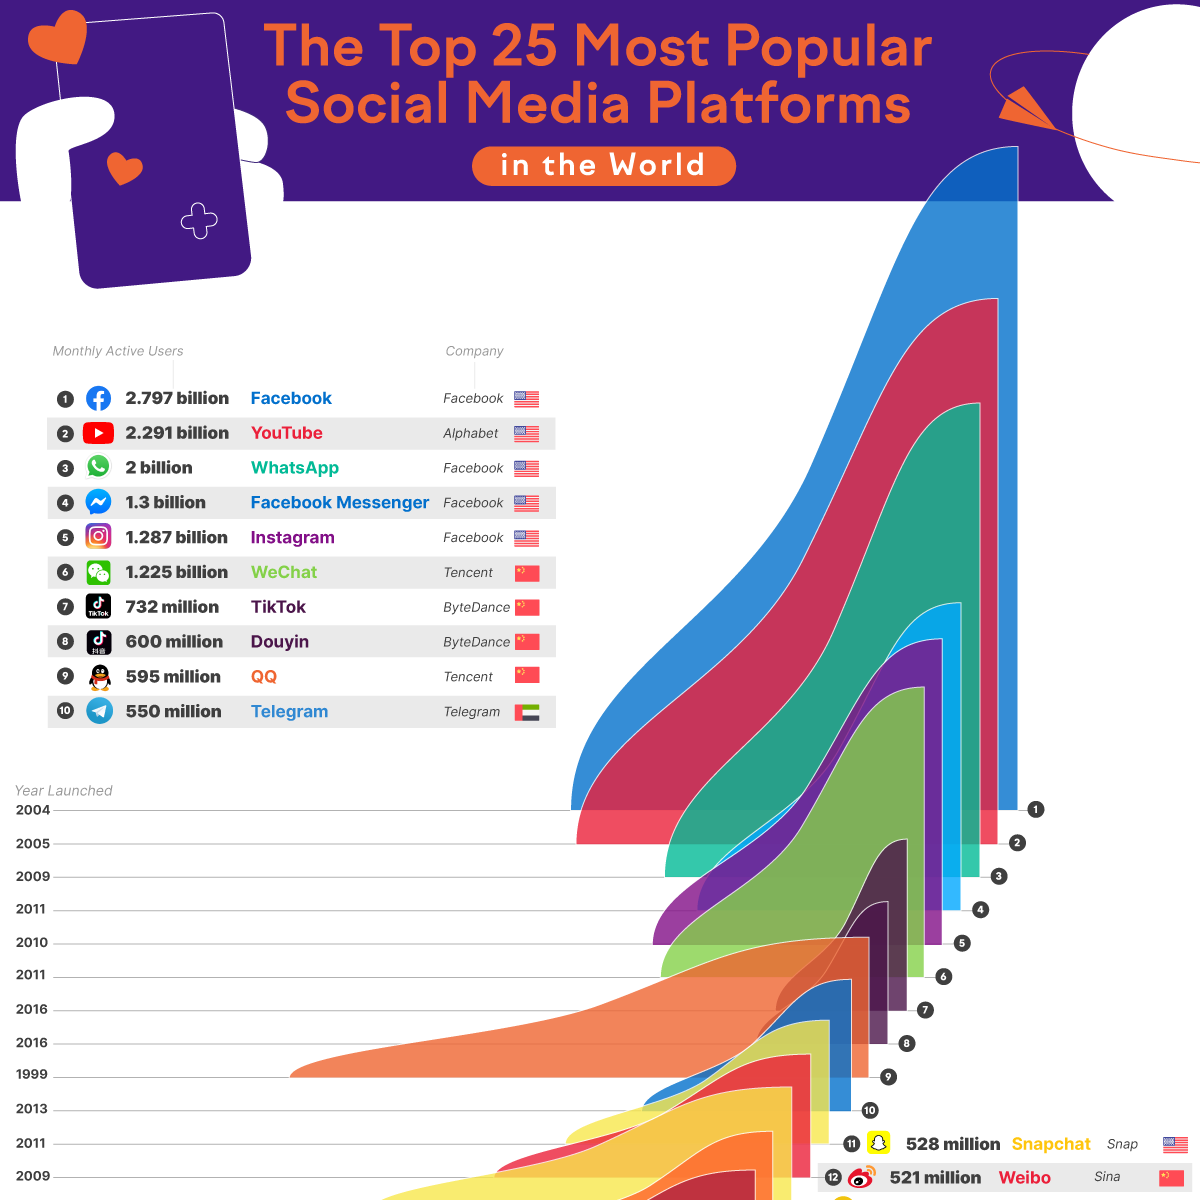 The Top 25 Most Popular Social Media Platforms in the World